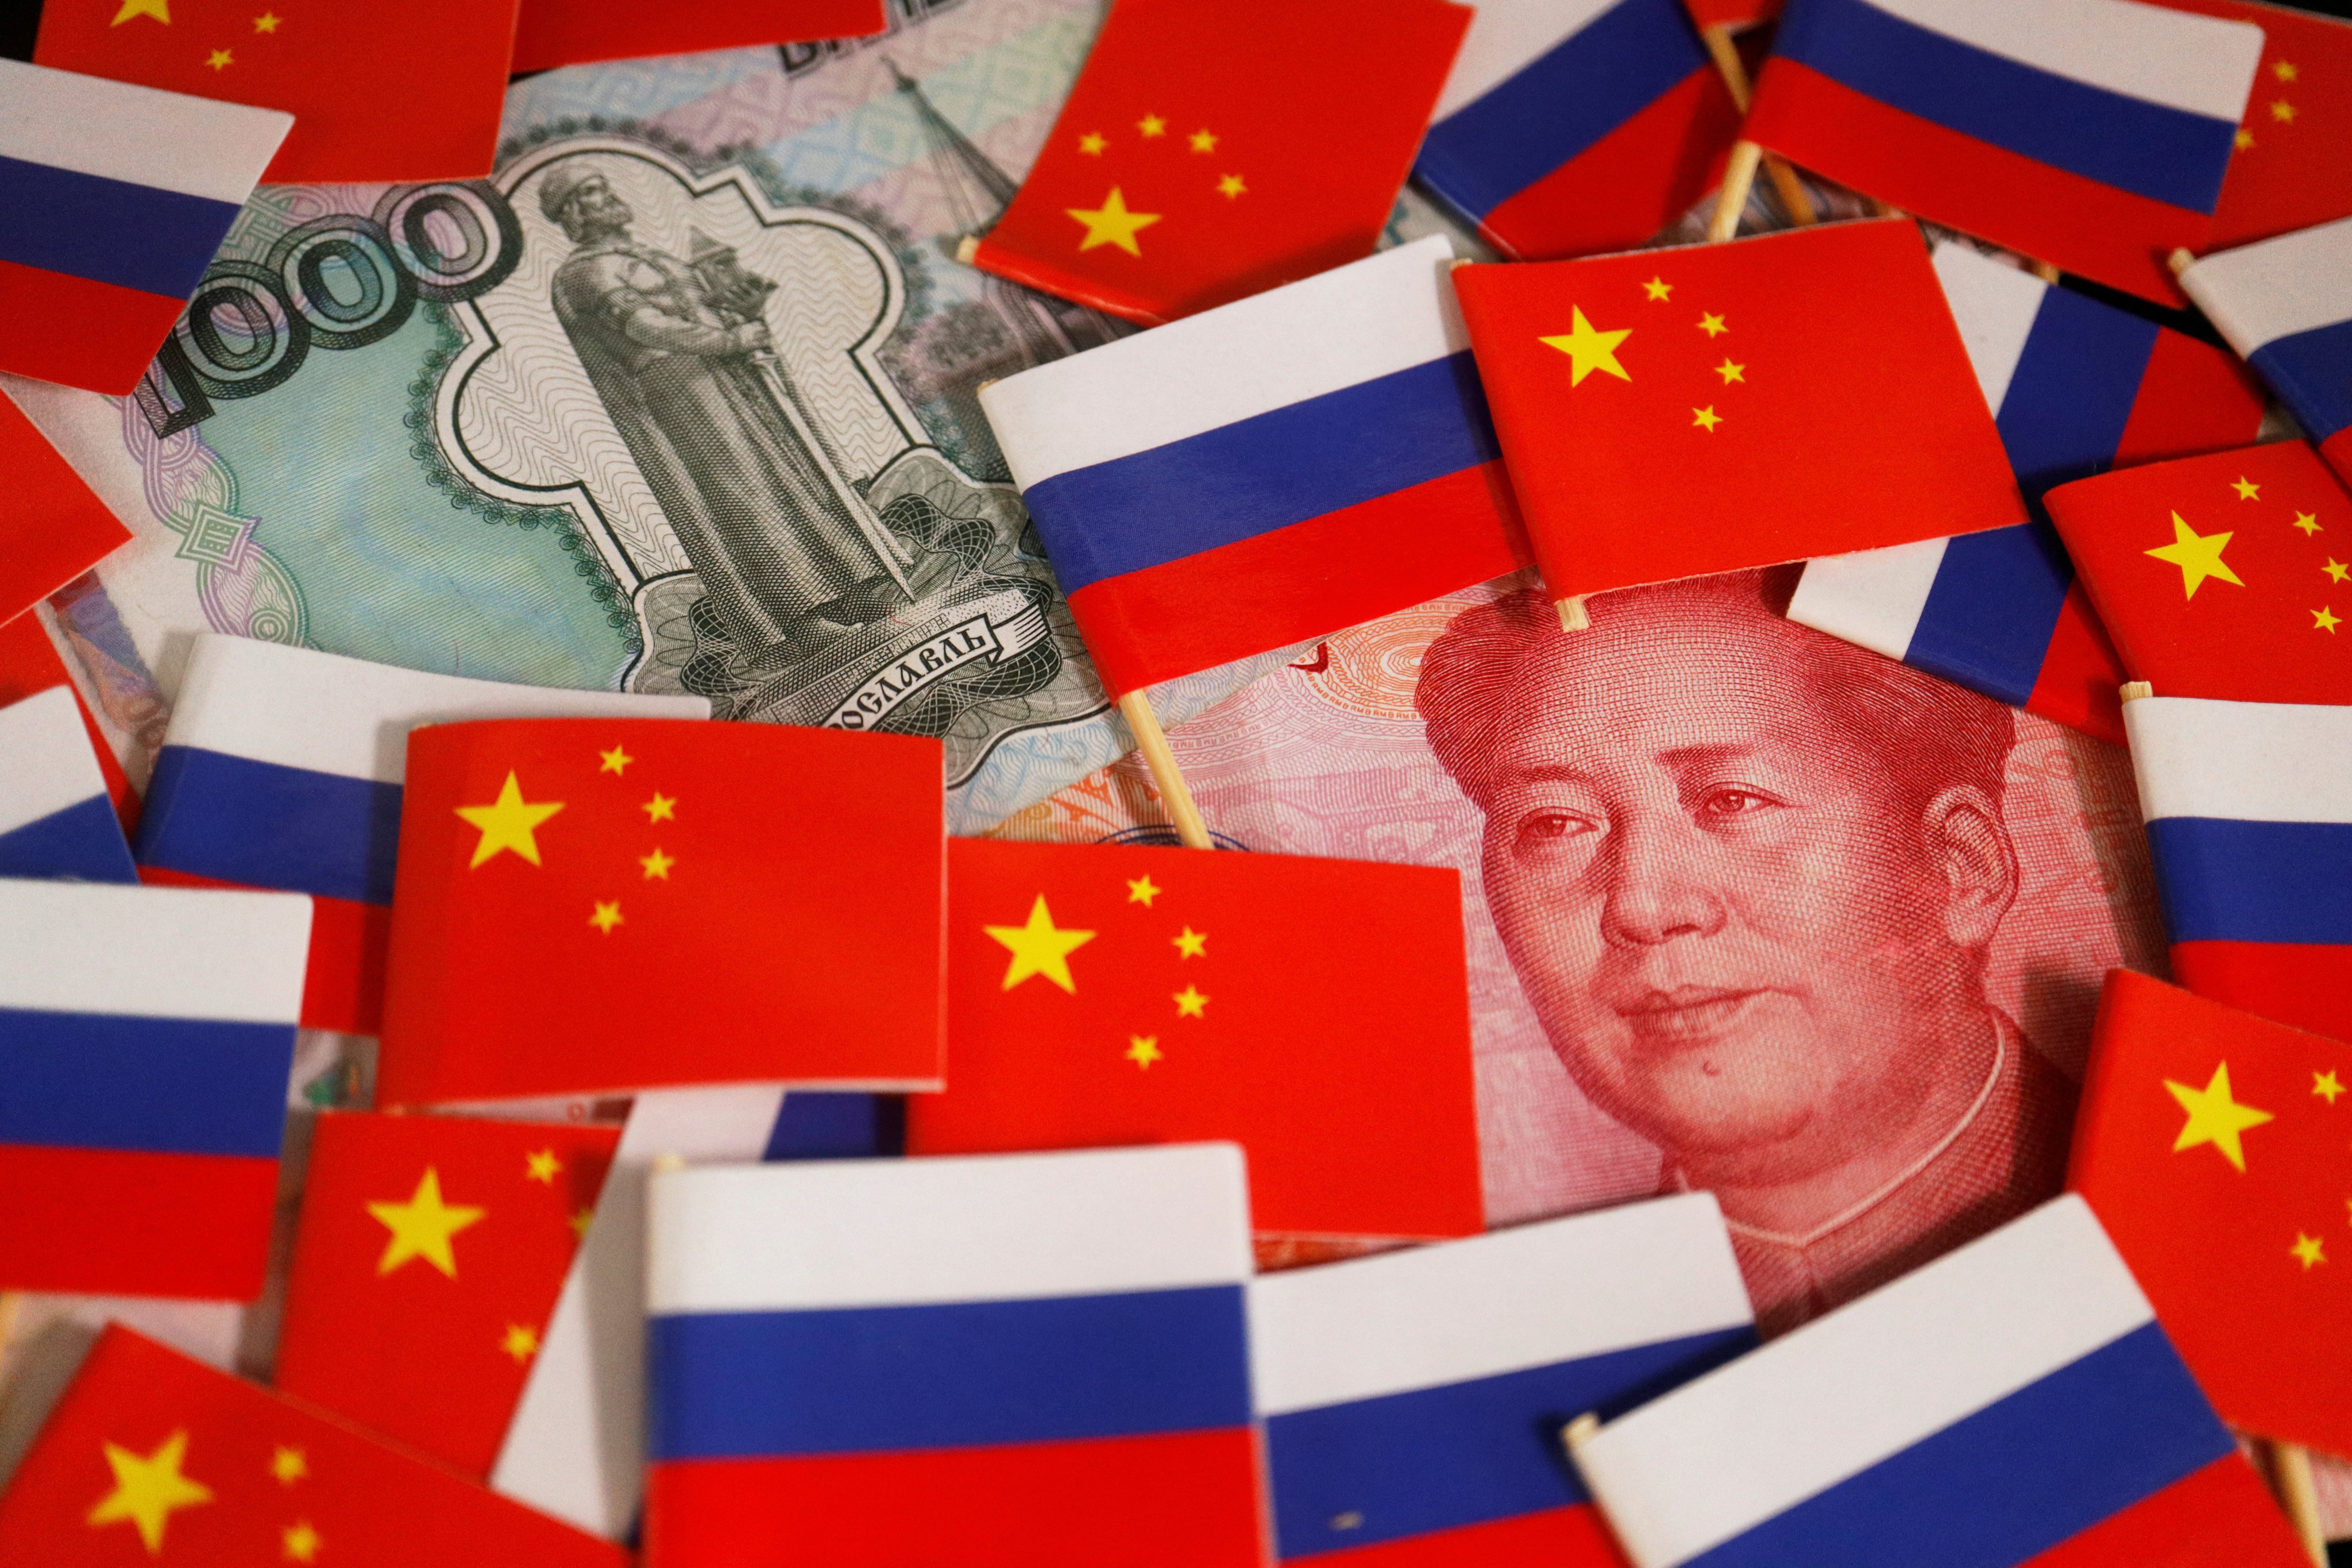 After the invasion of Ukraine isolated Moscow from the Western financial system, Russian companies have come to rely on the yuan for foreign-currency needs. Photo: Reuters